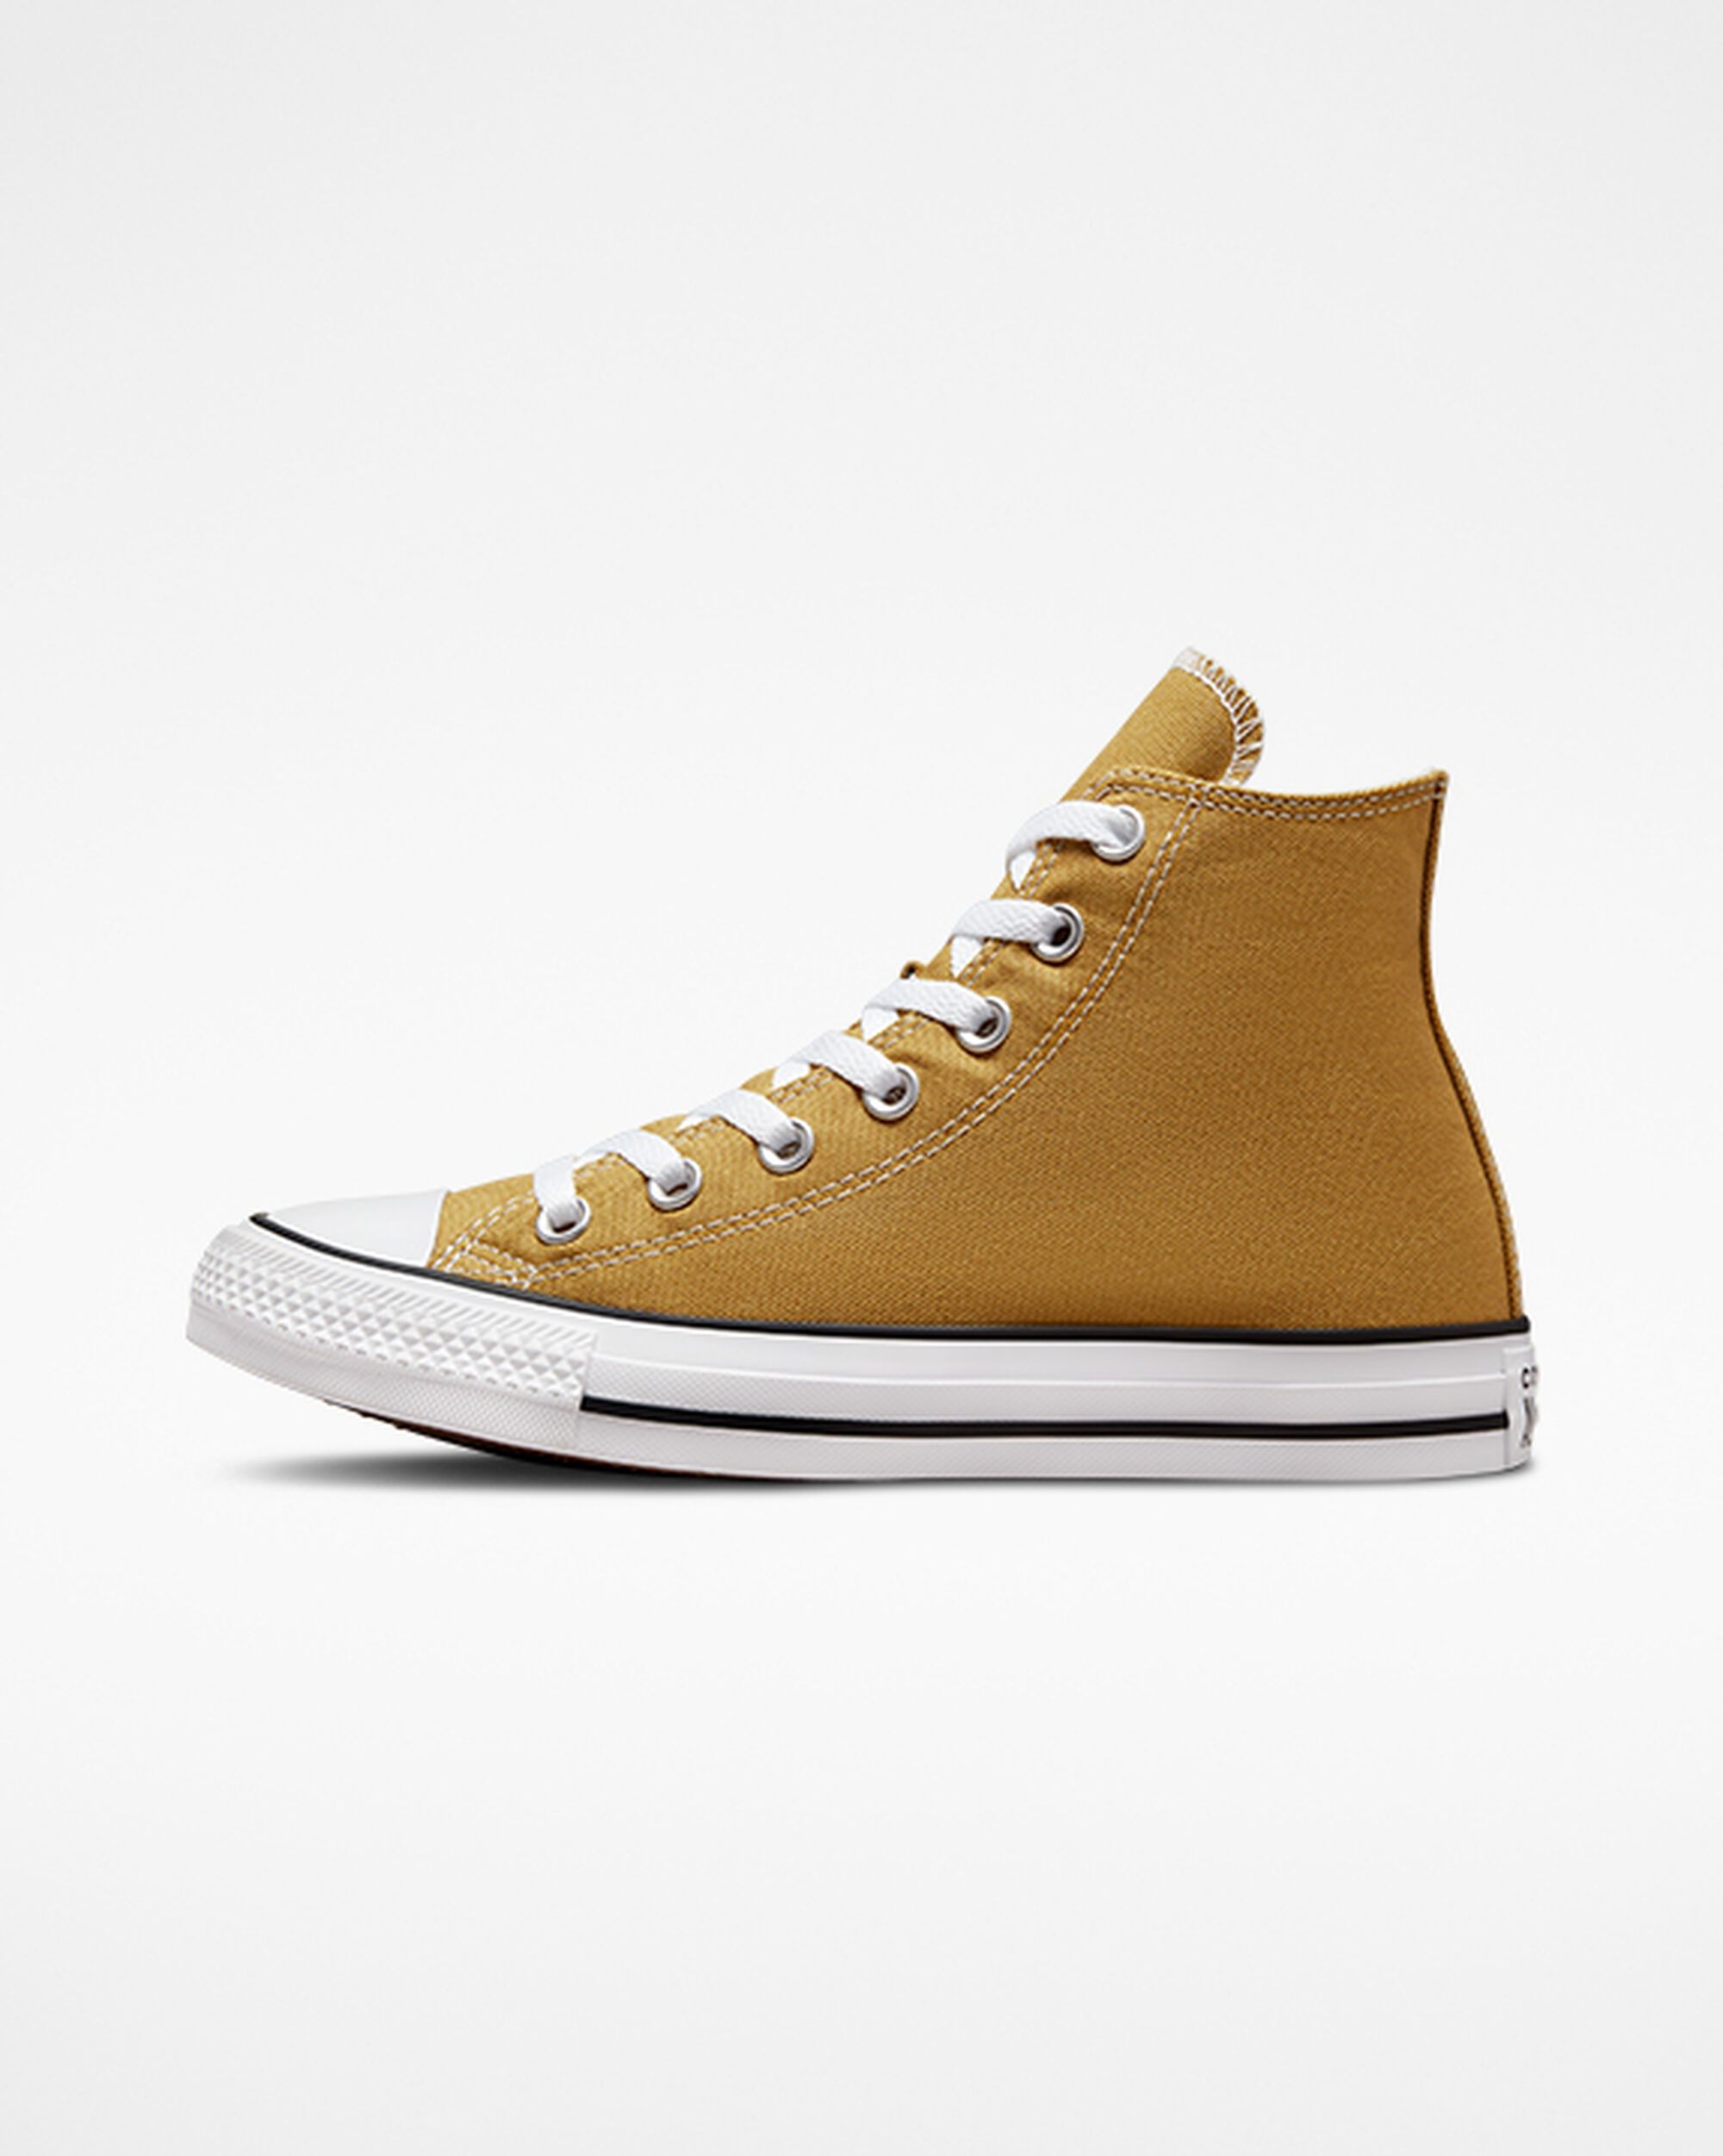 converse-chuck-taylor-all-star-classic-high-shoes-a02785f